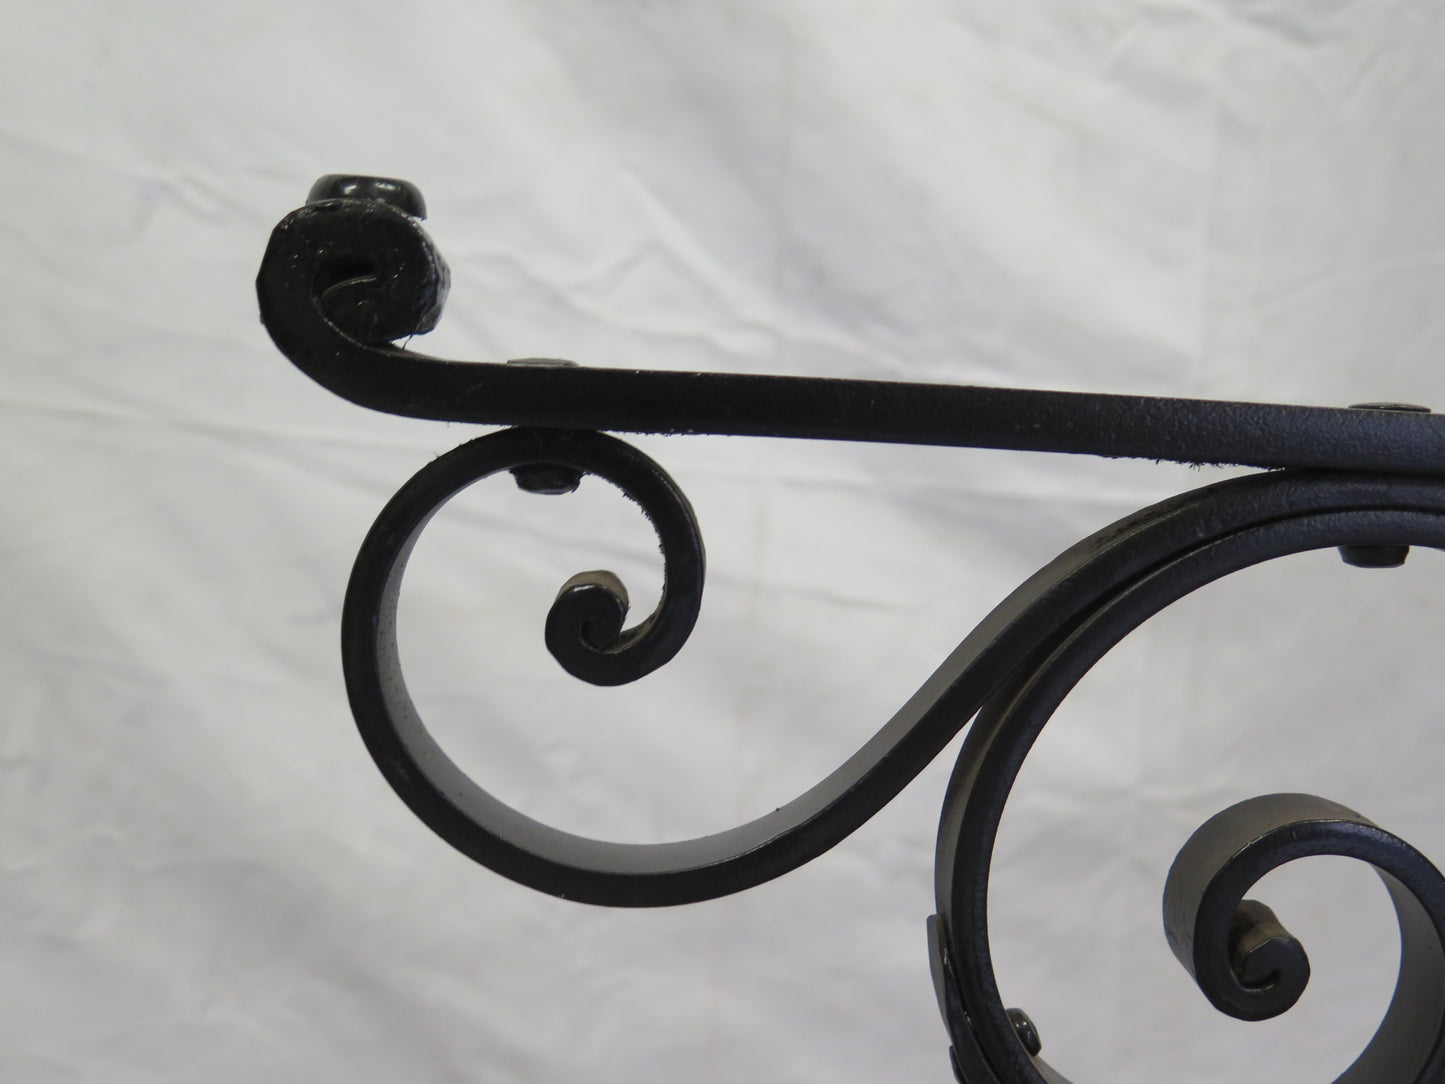 VINTAGE HANDMADE SQUARE WROUGHT IRON TABLE BASE MANUFACTURE ITALY CH